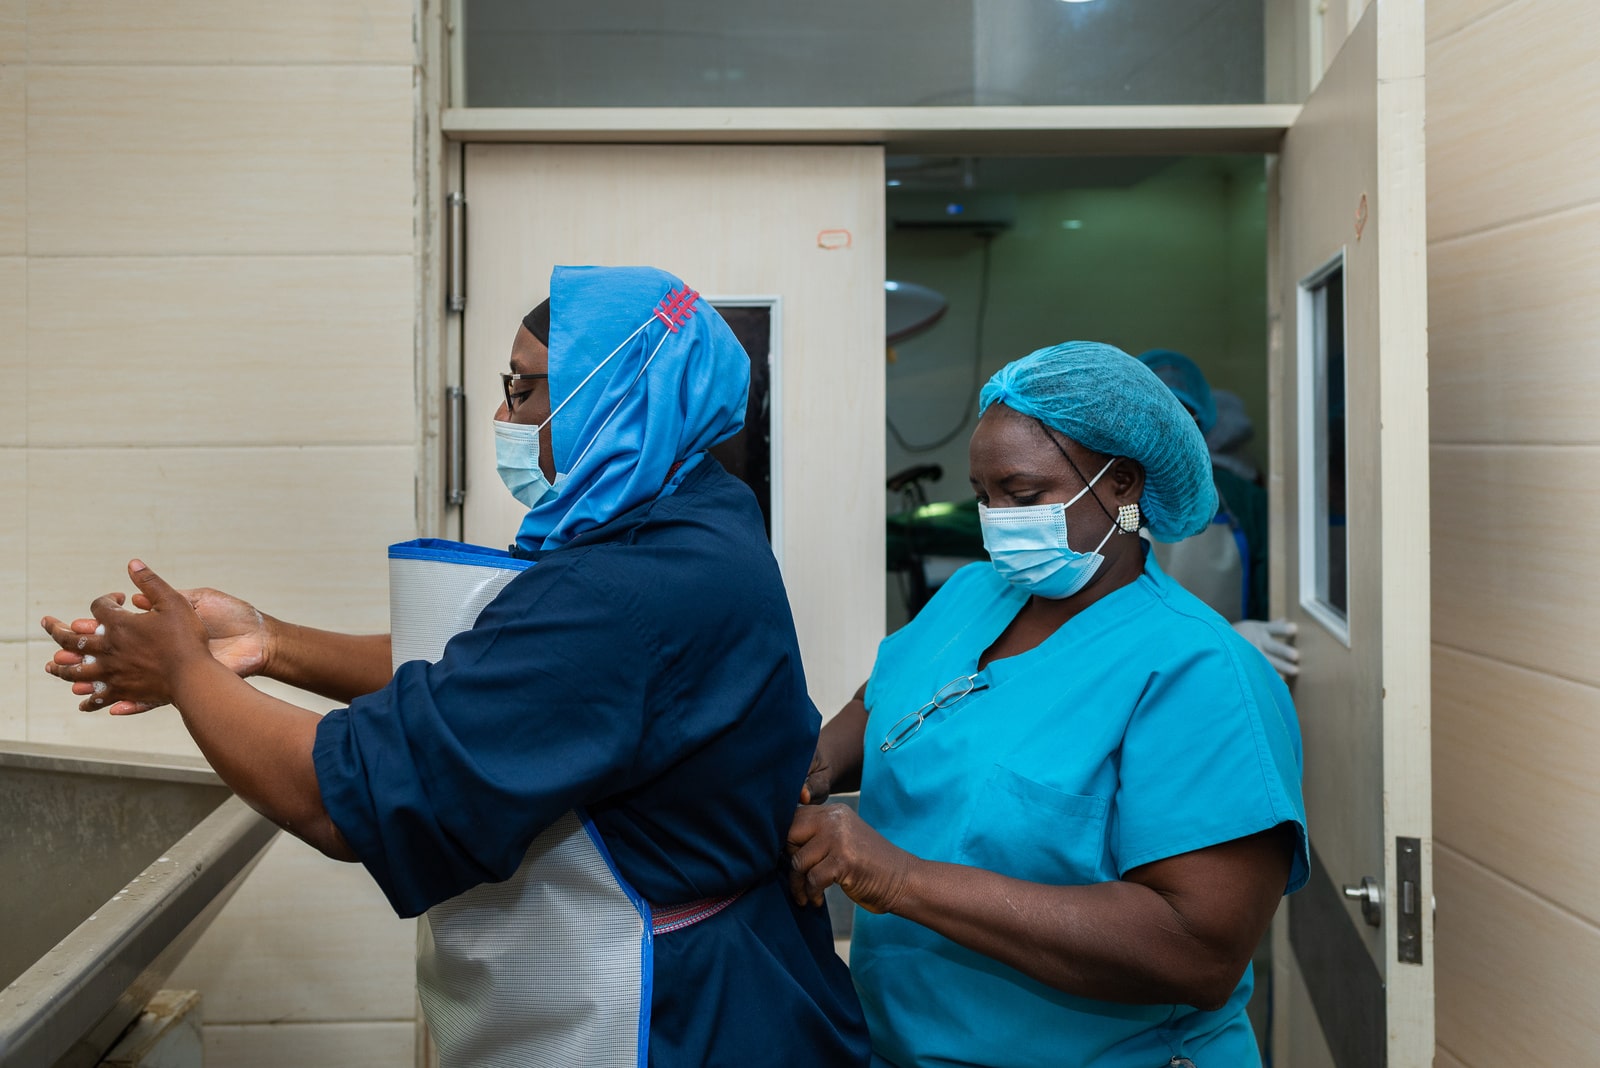 Dr Amina Abubakar Bello disinfects her hands as nurse Dorcas Samuel prepares her to go into the theater for a surgery in the Jummai Babangida Aliyu Maternal and Neonatal Hospital (JBAMN) in Niger State on 24 February 2021.